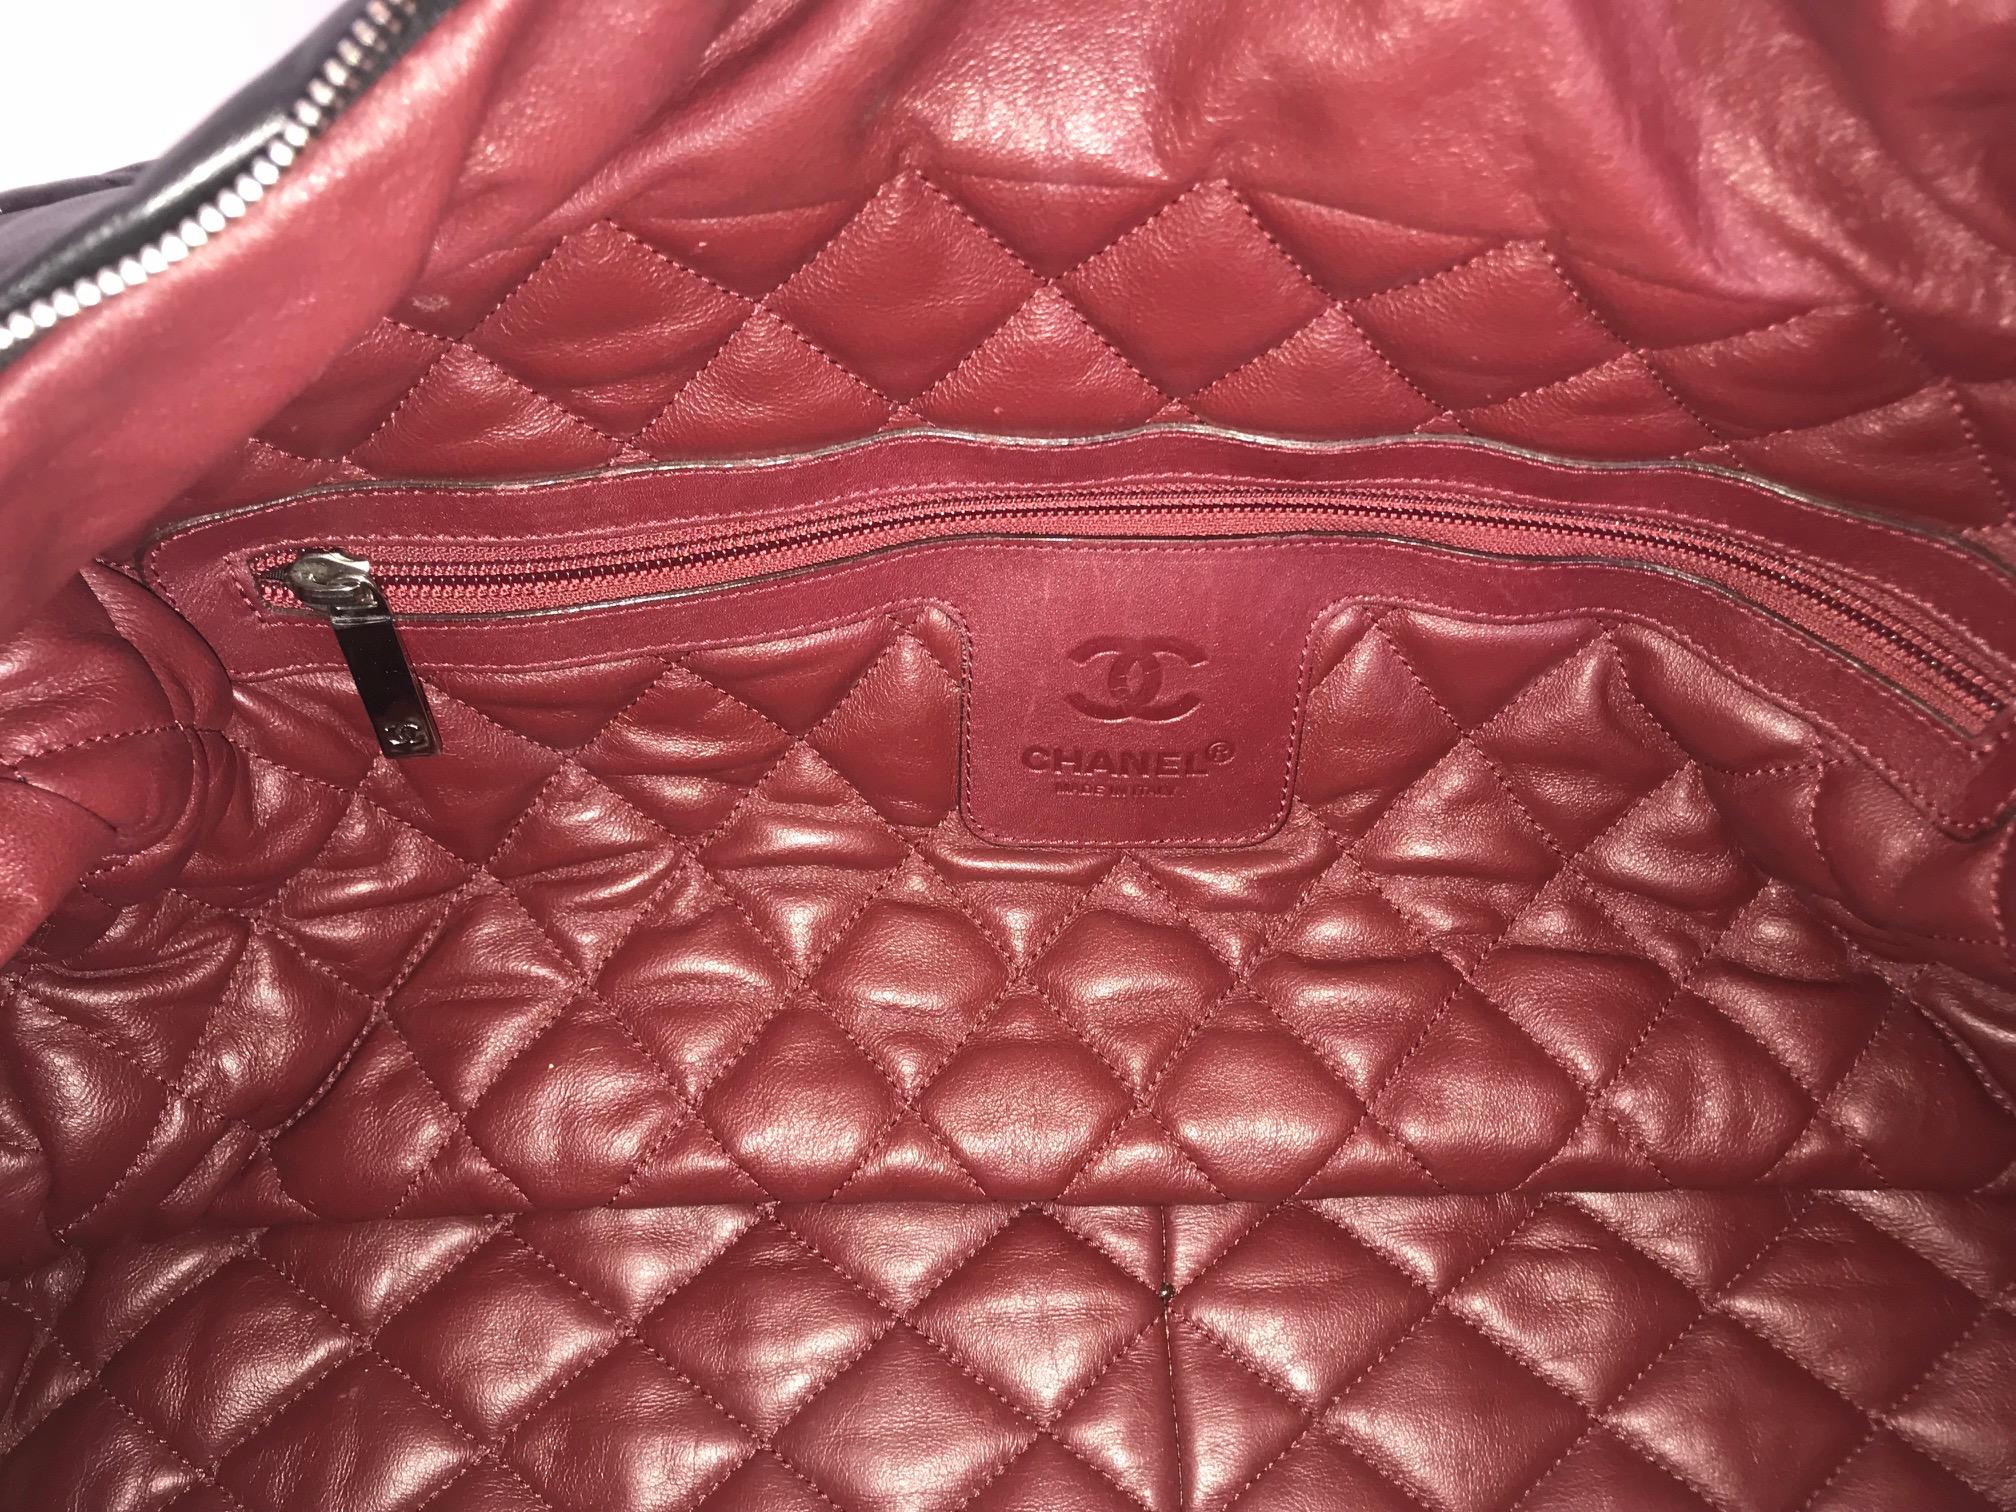  Chanel Large Coco Cocoon Tote For Sale 6